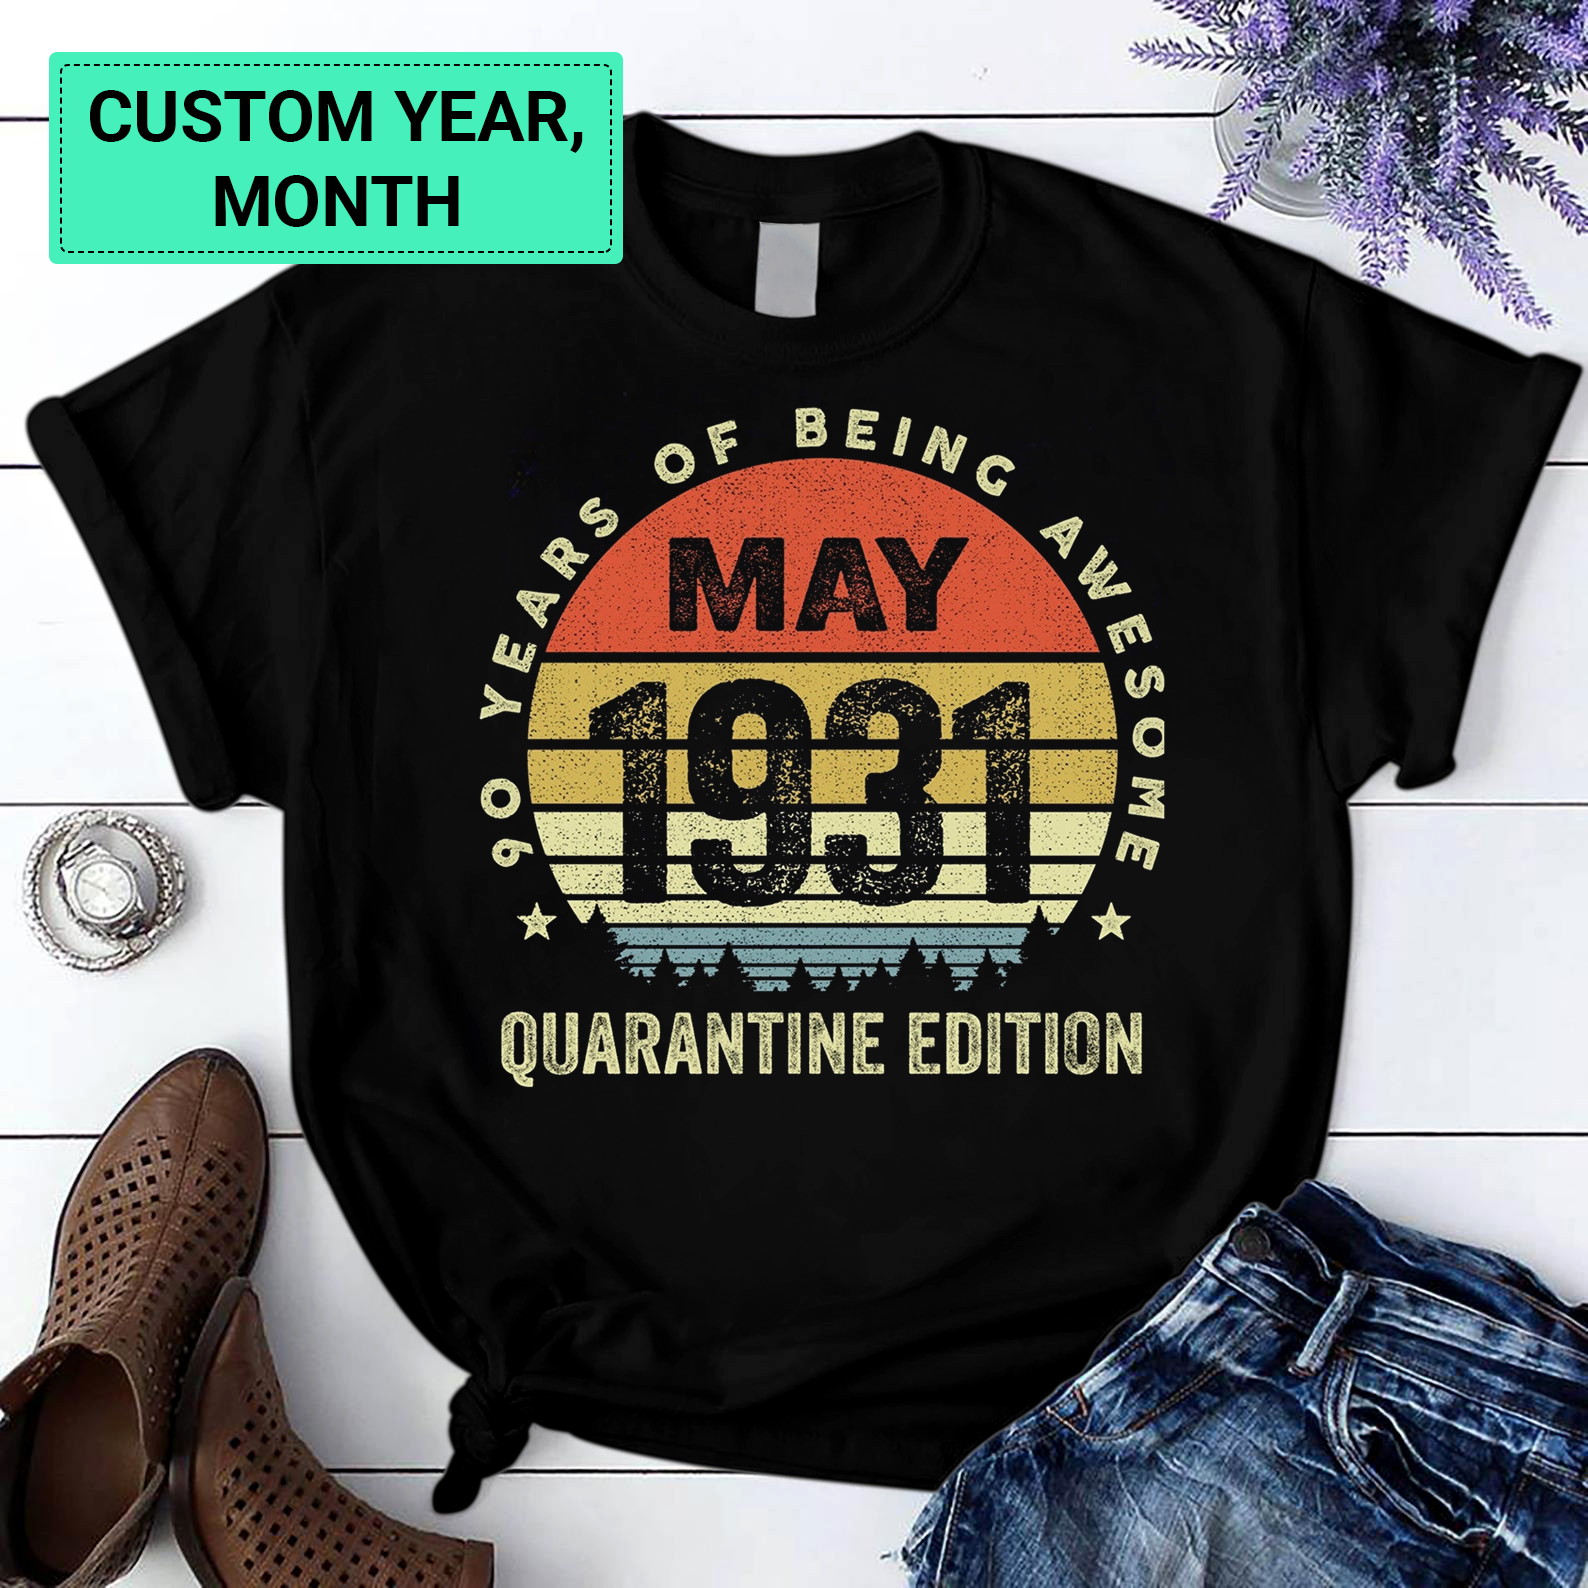 Personalization Custom Vintage May 1931 90 Years Of Being Awesome Quarantine Edition 90Th Birthday Gift T Shirt Black S-6Xl